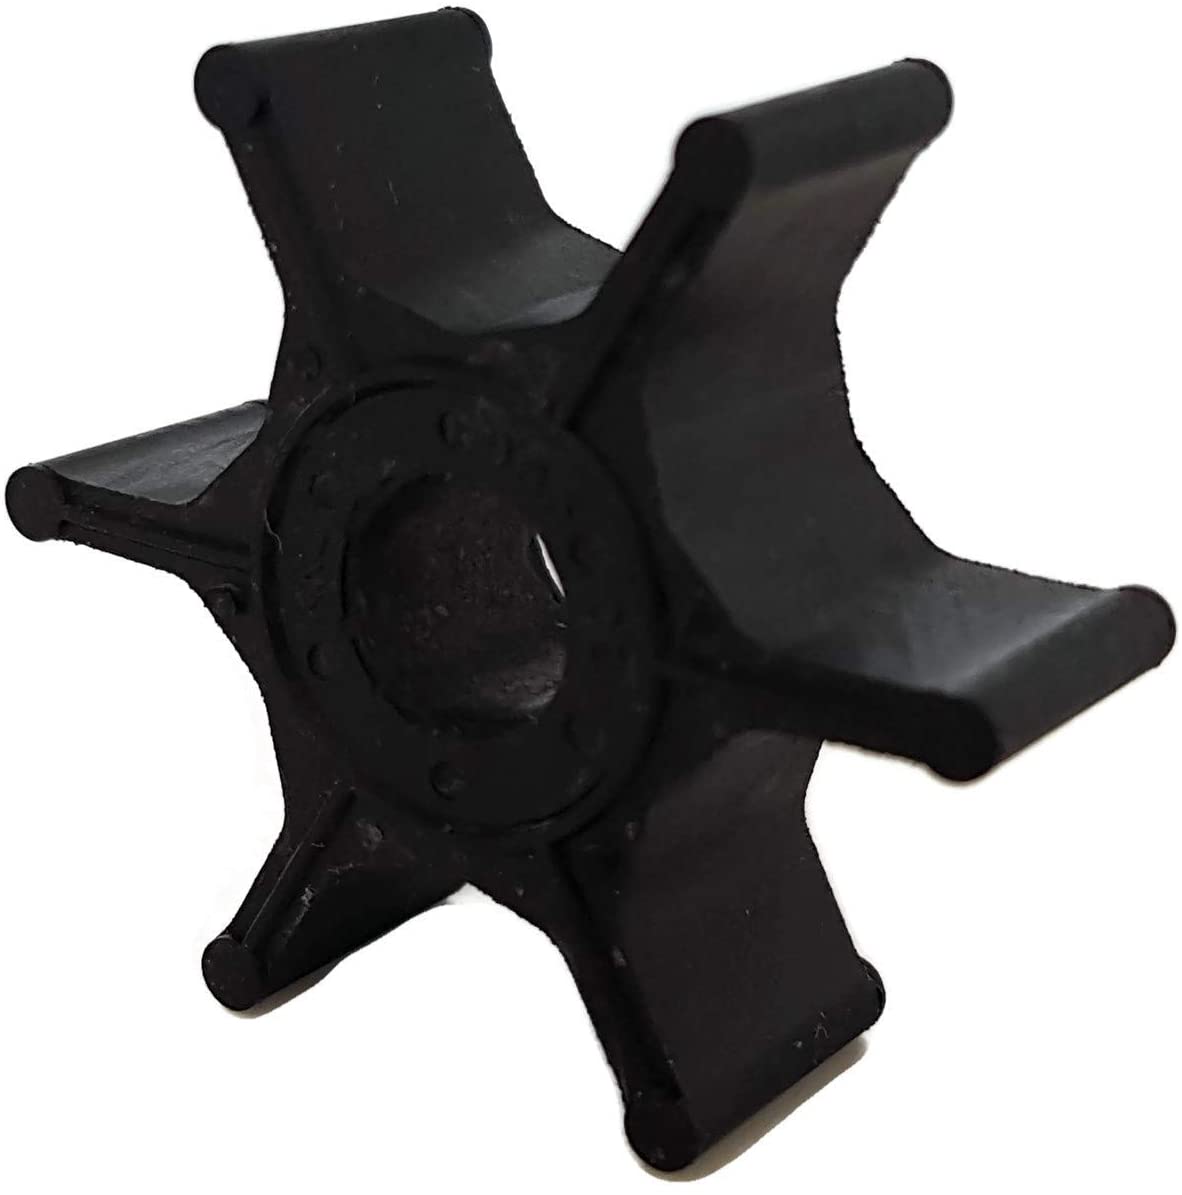 Boat Engine Water Pump Impeller 17461-98500 17461-98501 17461-98502 17461-98503 for Suzuki 2HP 3.5HP 4HP 5HP 6HP 8HP Outboard